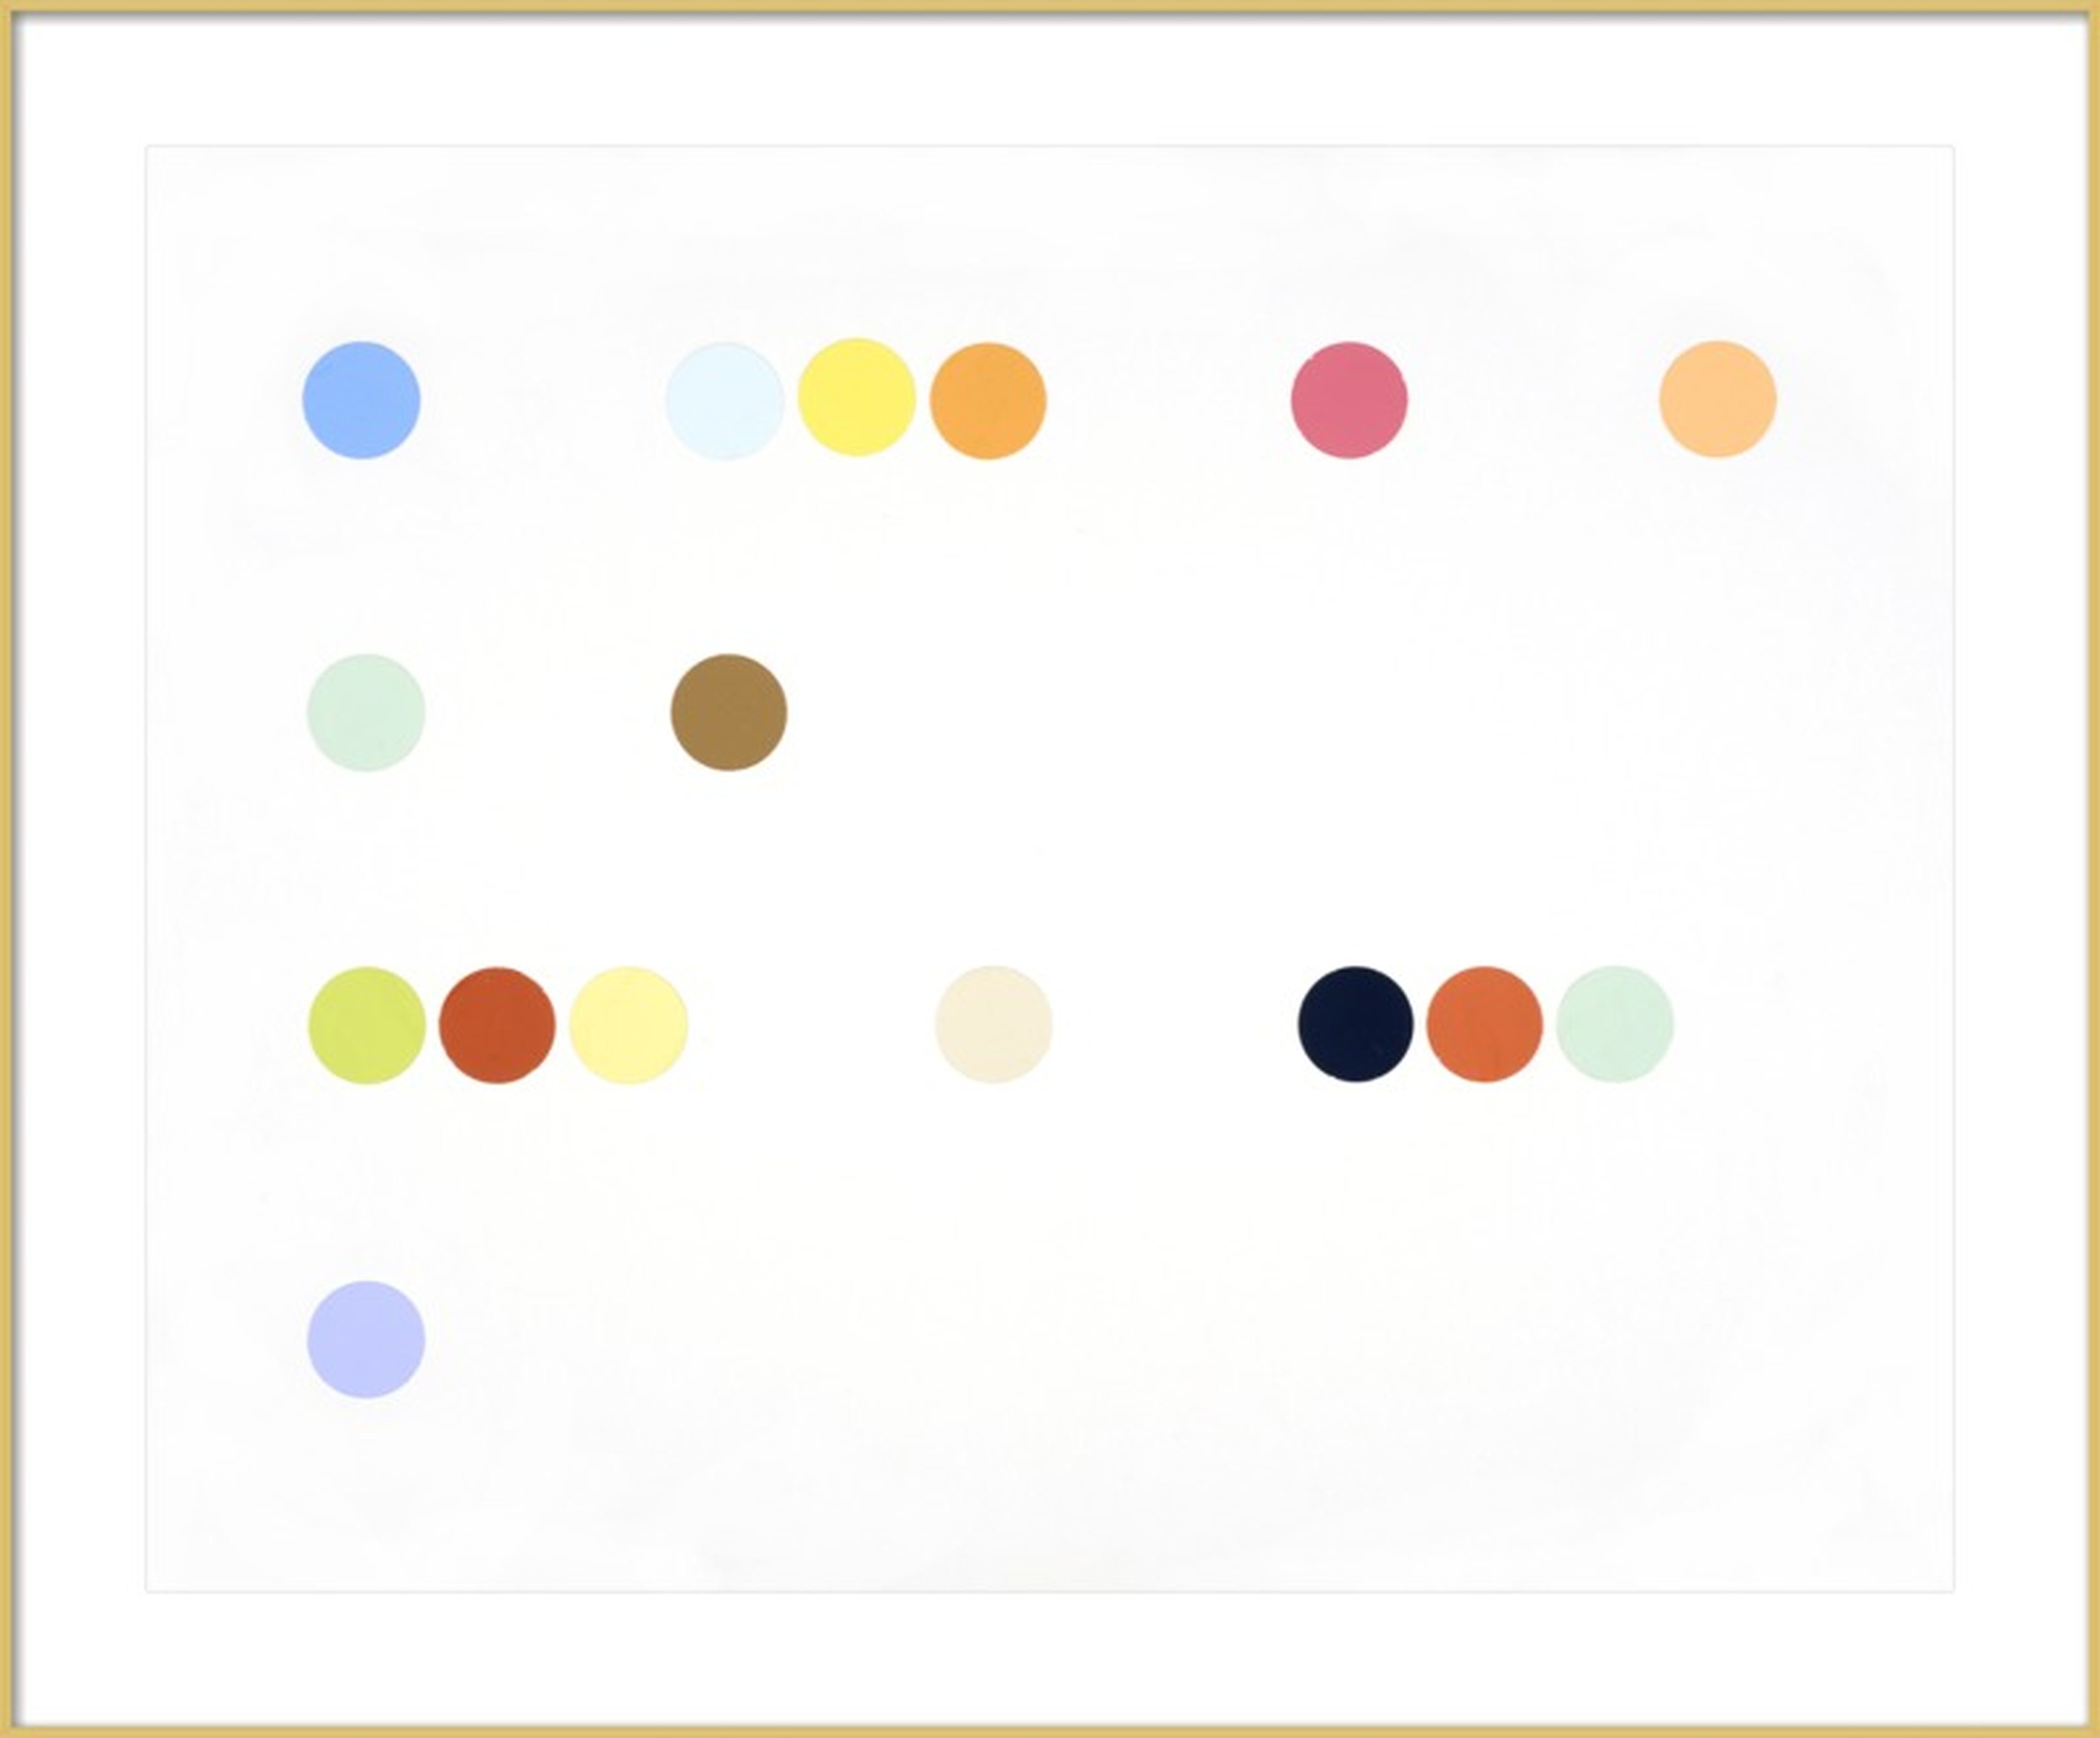 Dots (Like) - 44x36 - Frosted Gold Metal Frame with Matte - Artfully Walls